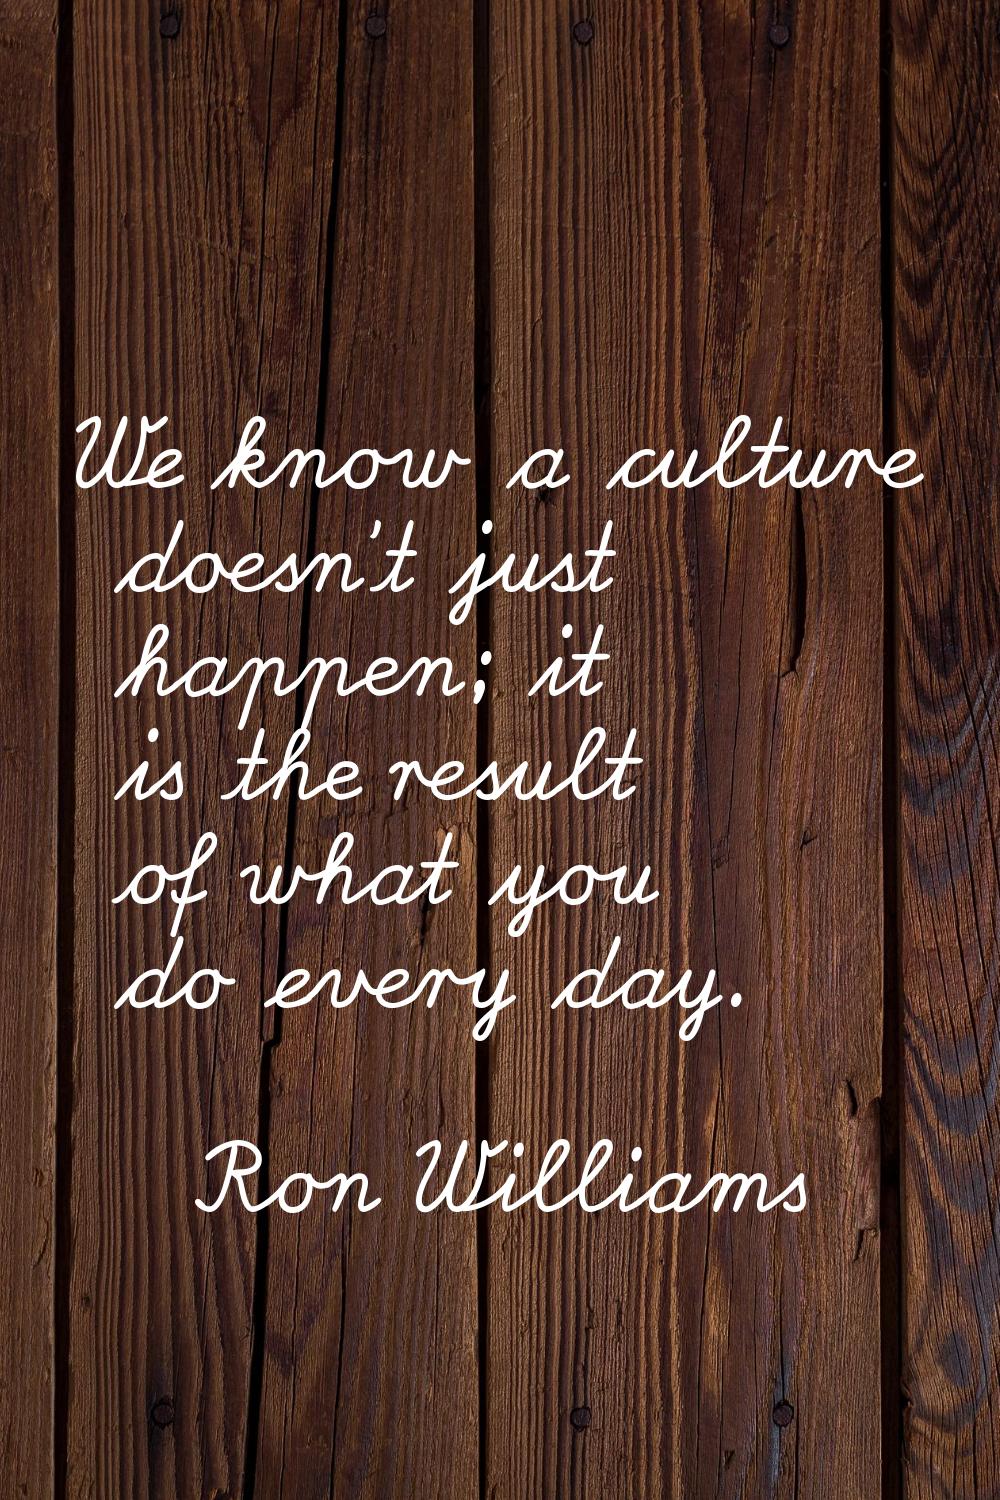 We know a culture doesn't just happen; it is the result of what you do every day.